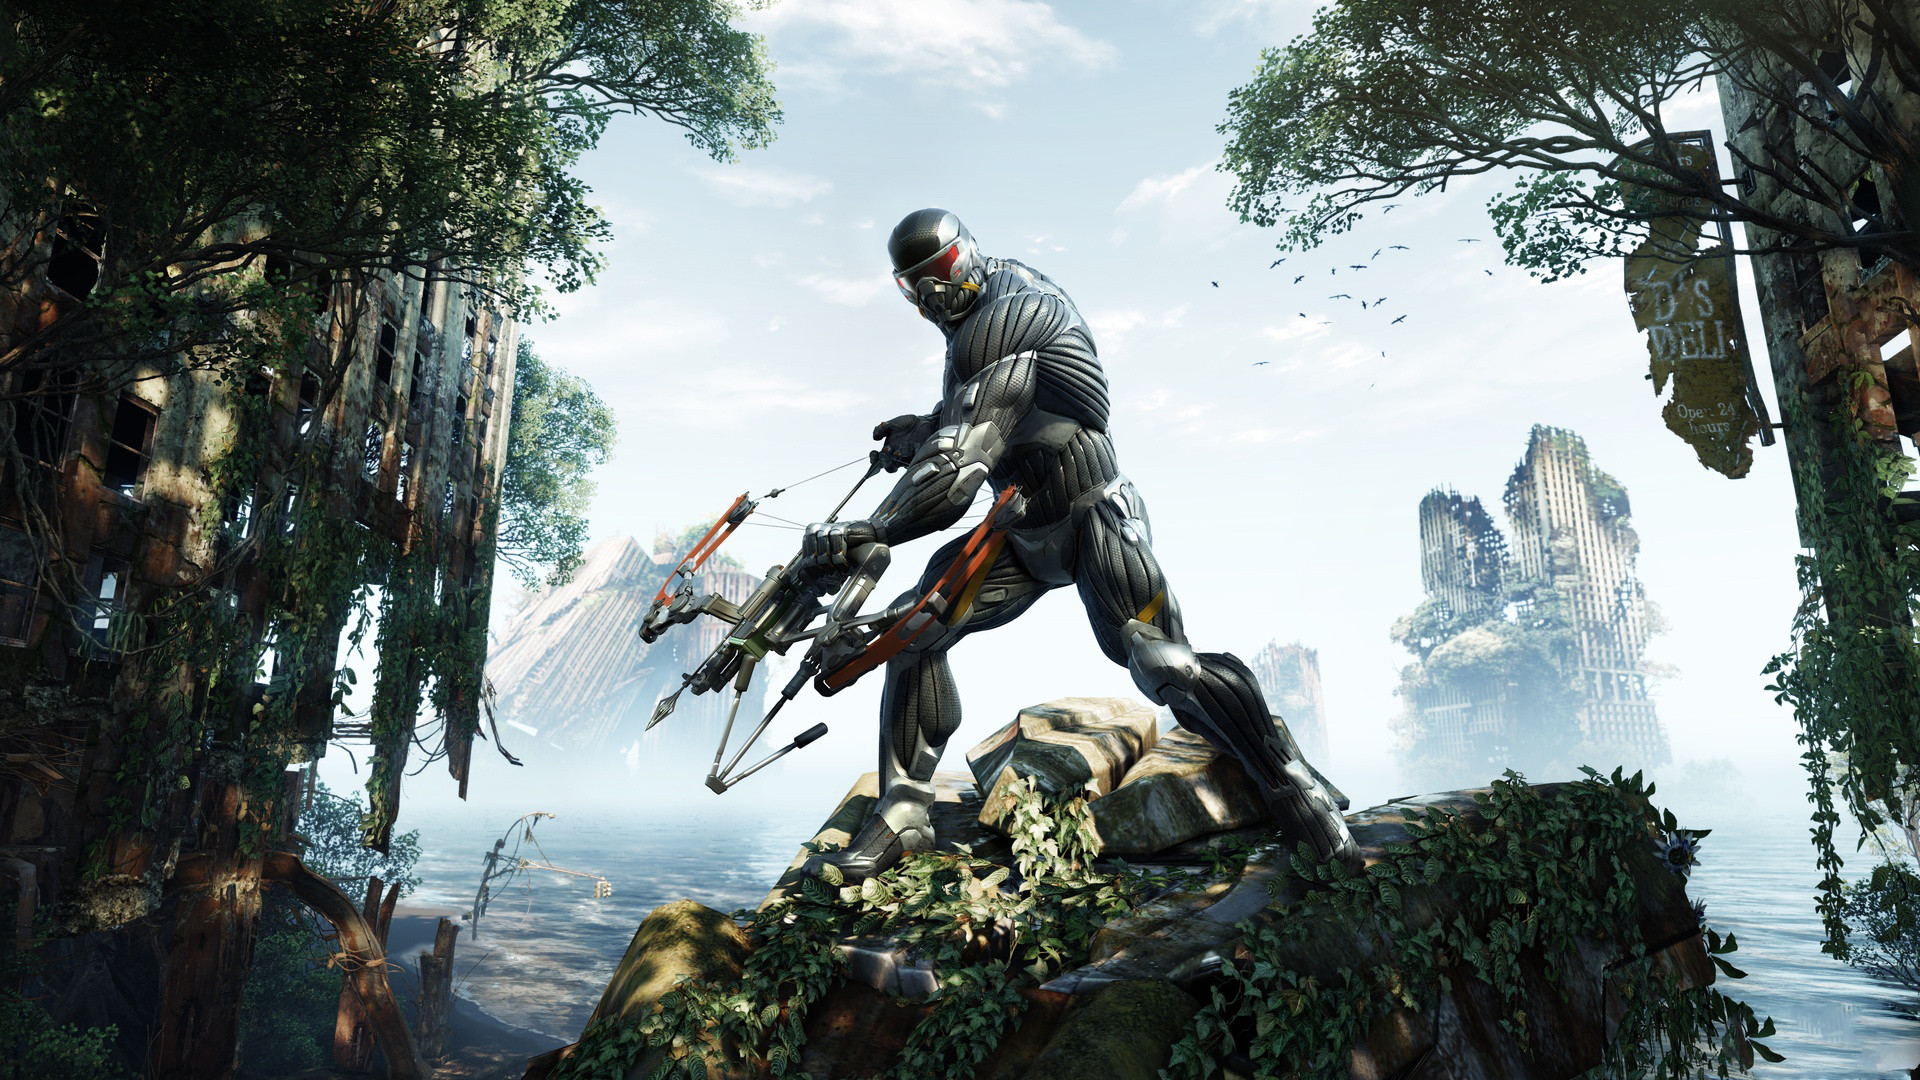 crysis hd wallpapers,action adventure game,pc game,screenshot,games,technology